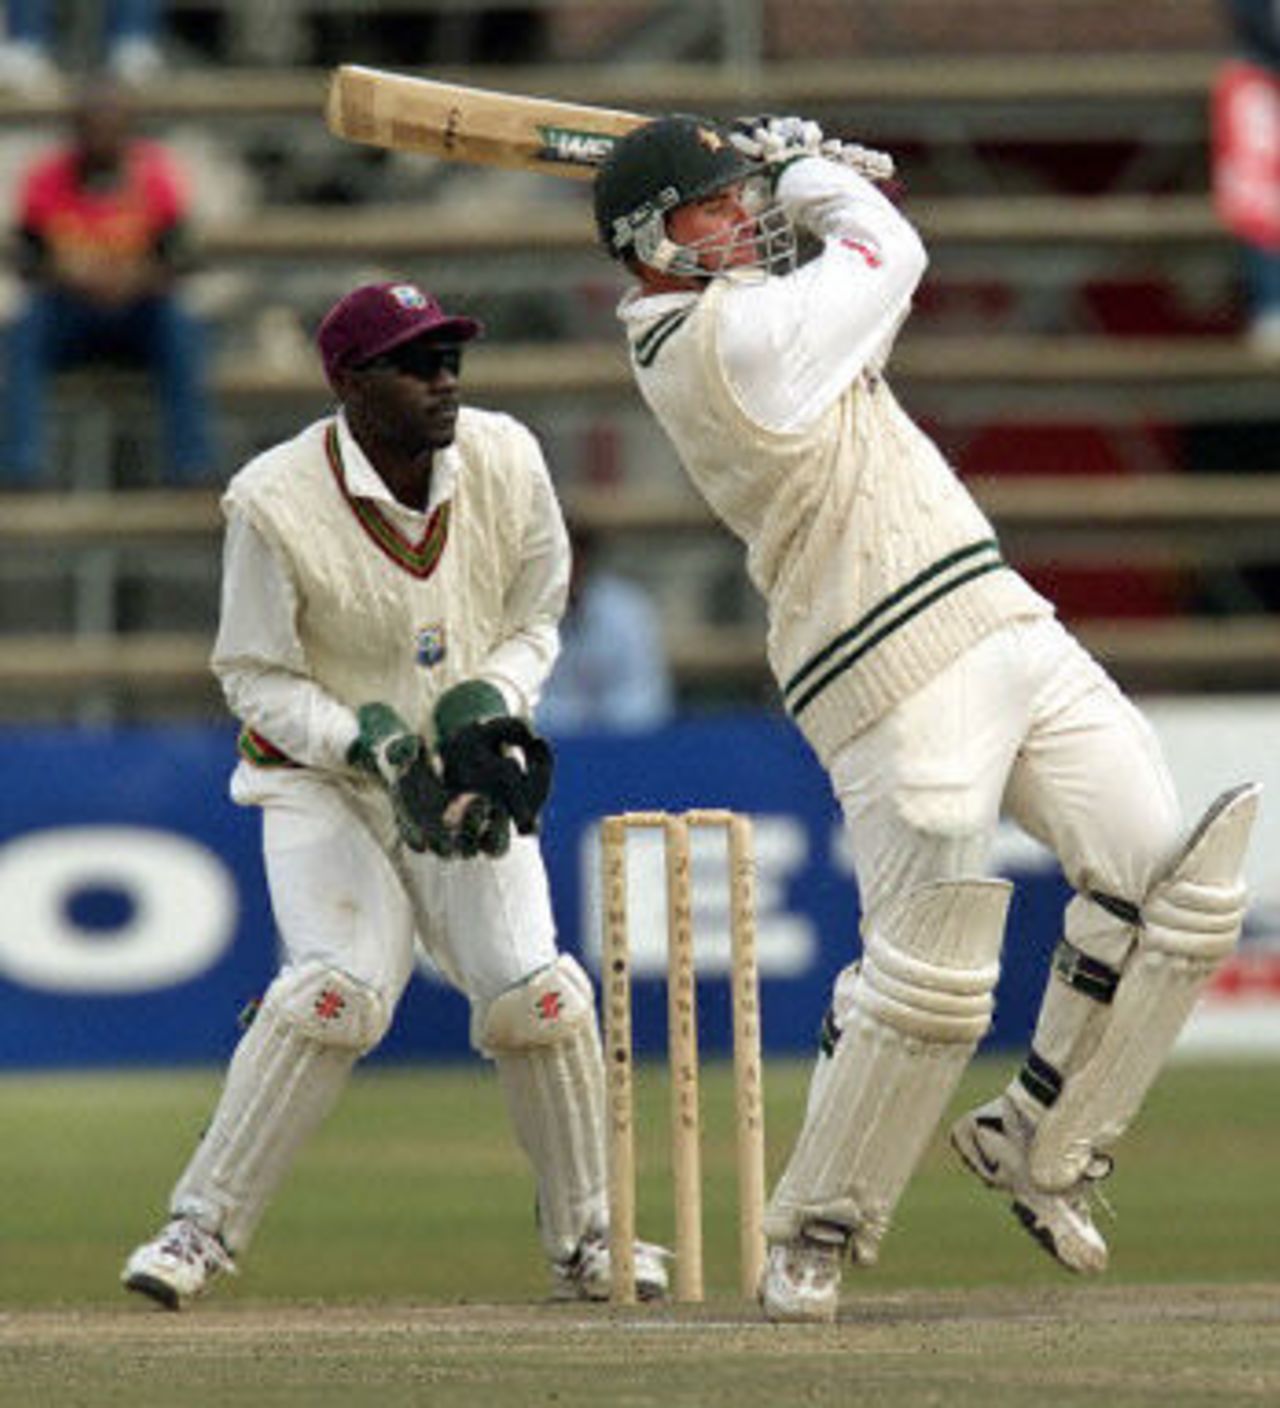 Craig Wishart drives to the boundary watched by Courtney Brown, West Indies v Zimbabwe 2nd Test at Harare, 27-31 July 2001.